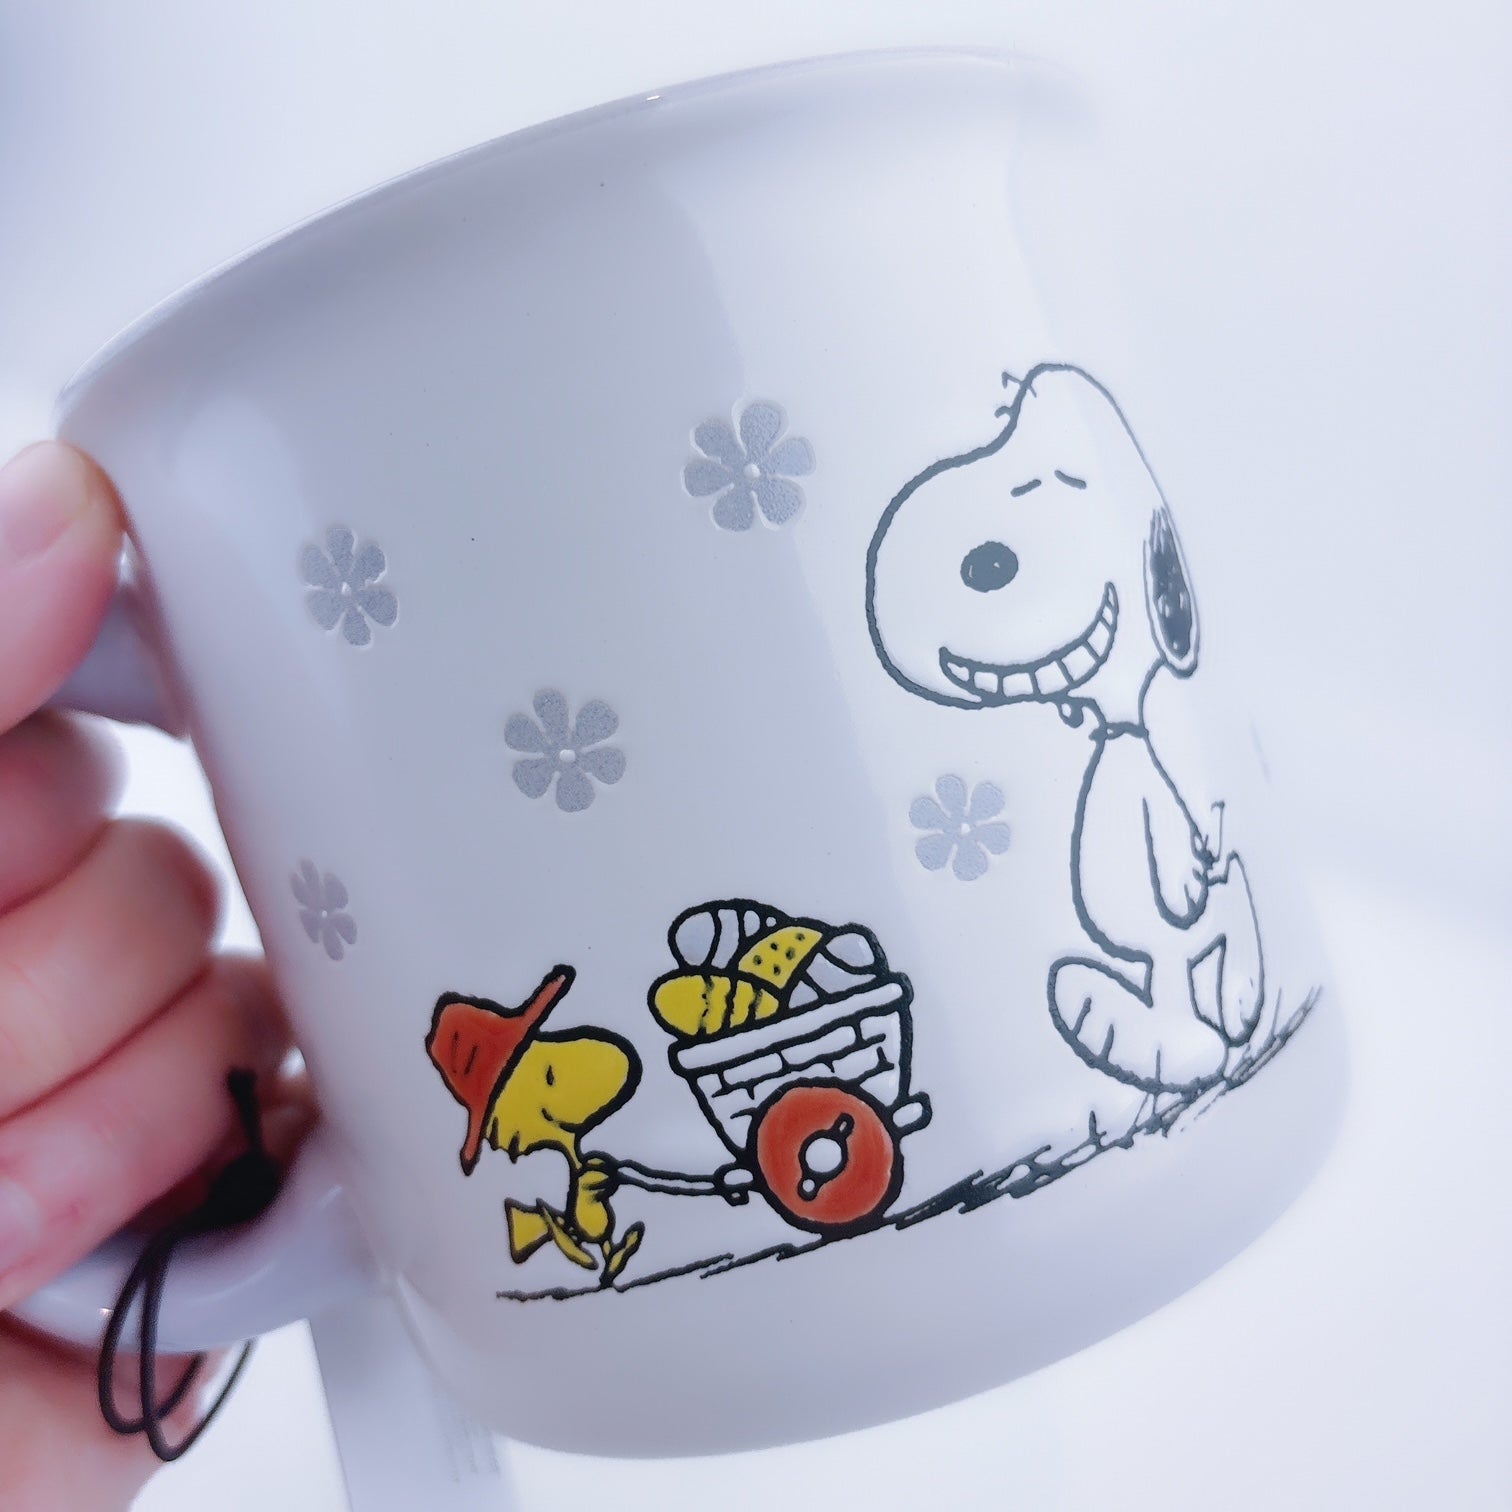 Peanuts Snoopy & Woodstock Happy Easter Together Big Coffee Mug Cup 21 –  Pit-a-Pats.com